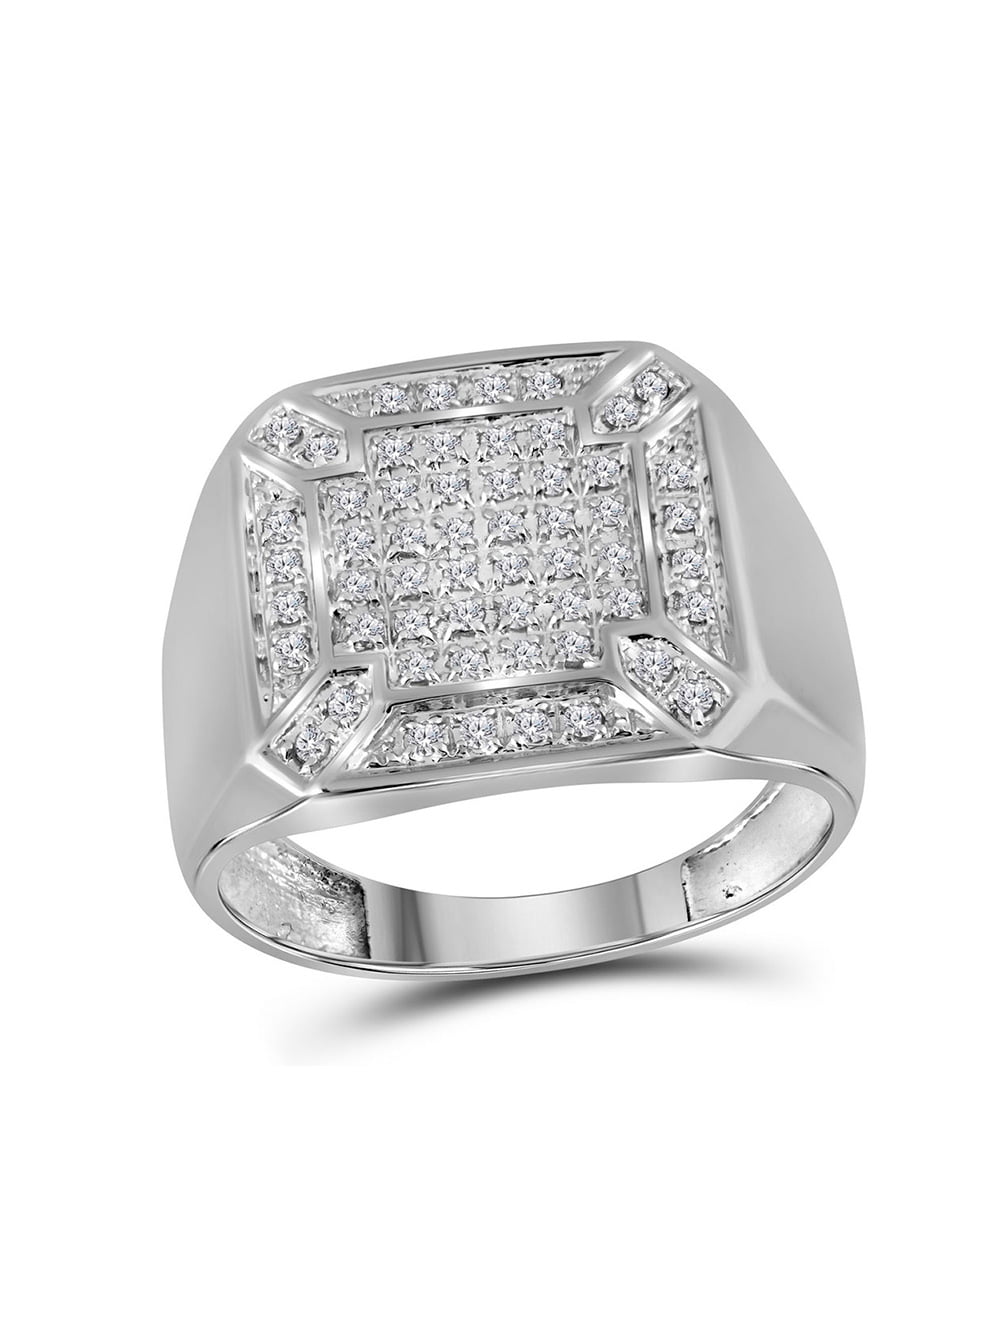 10kt White Gold Mens Round Diamond Square Cluster Brushed Ring 1/8 Cttw 